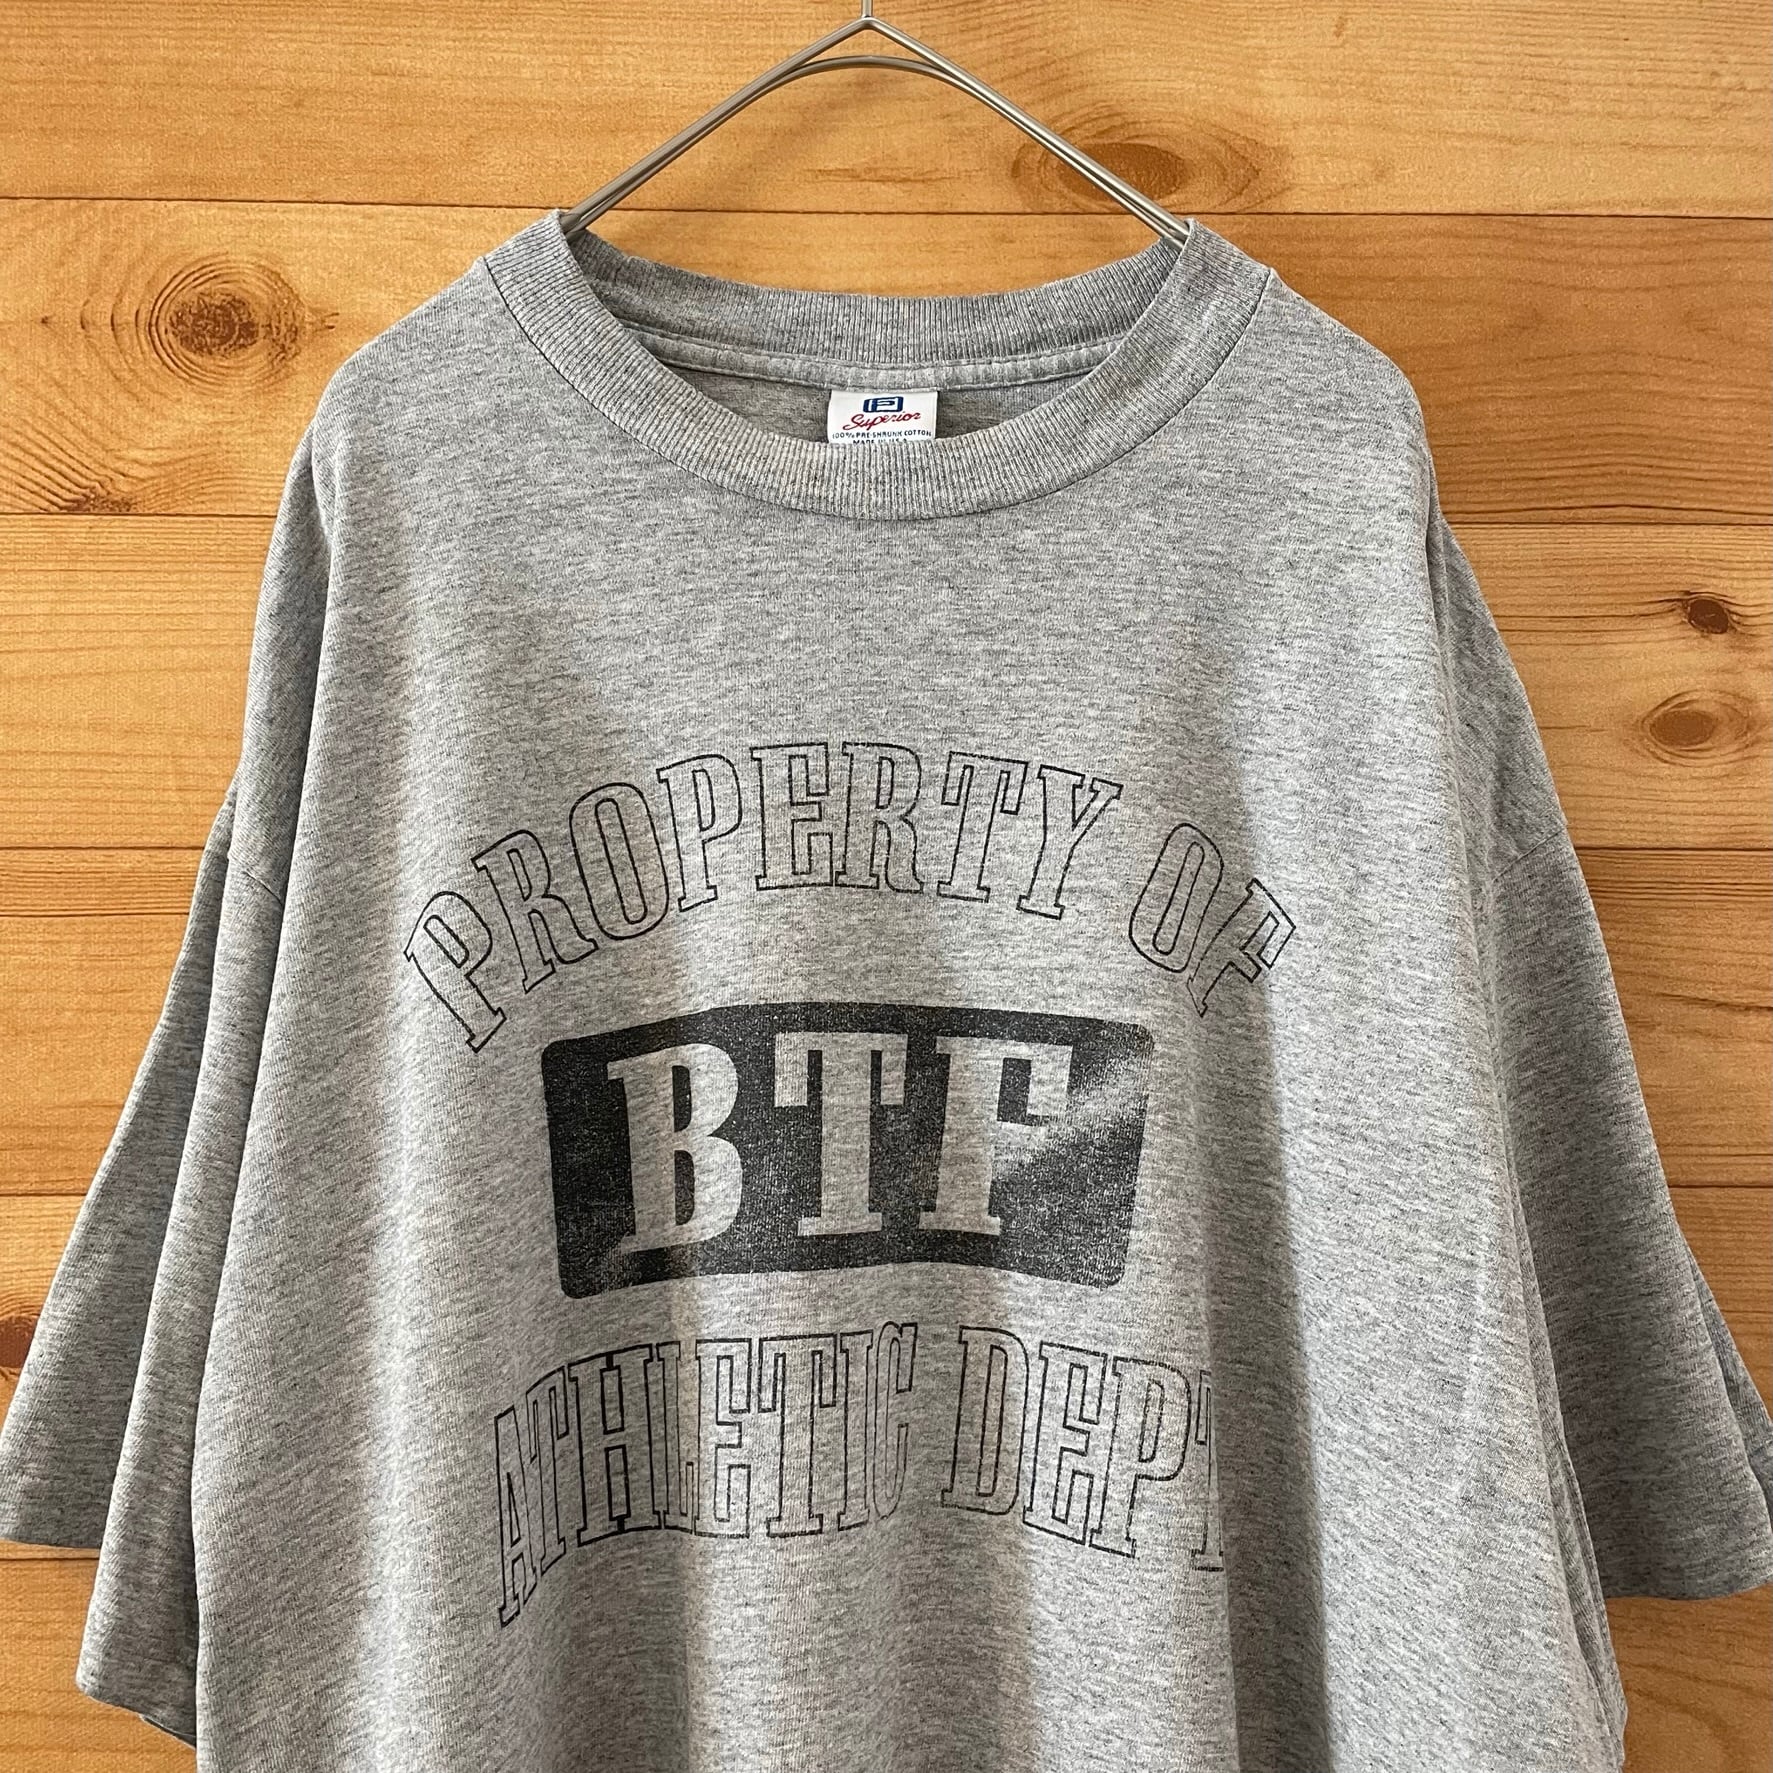 Superior】90s USA製 企業系 フィットネスジム ロゴ プリントTシャツ